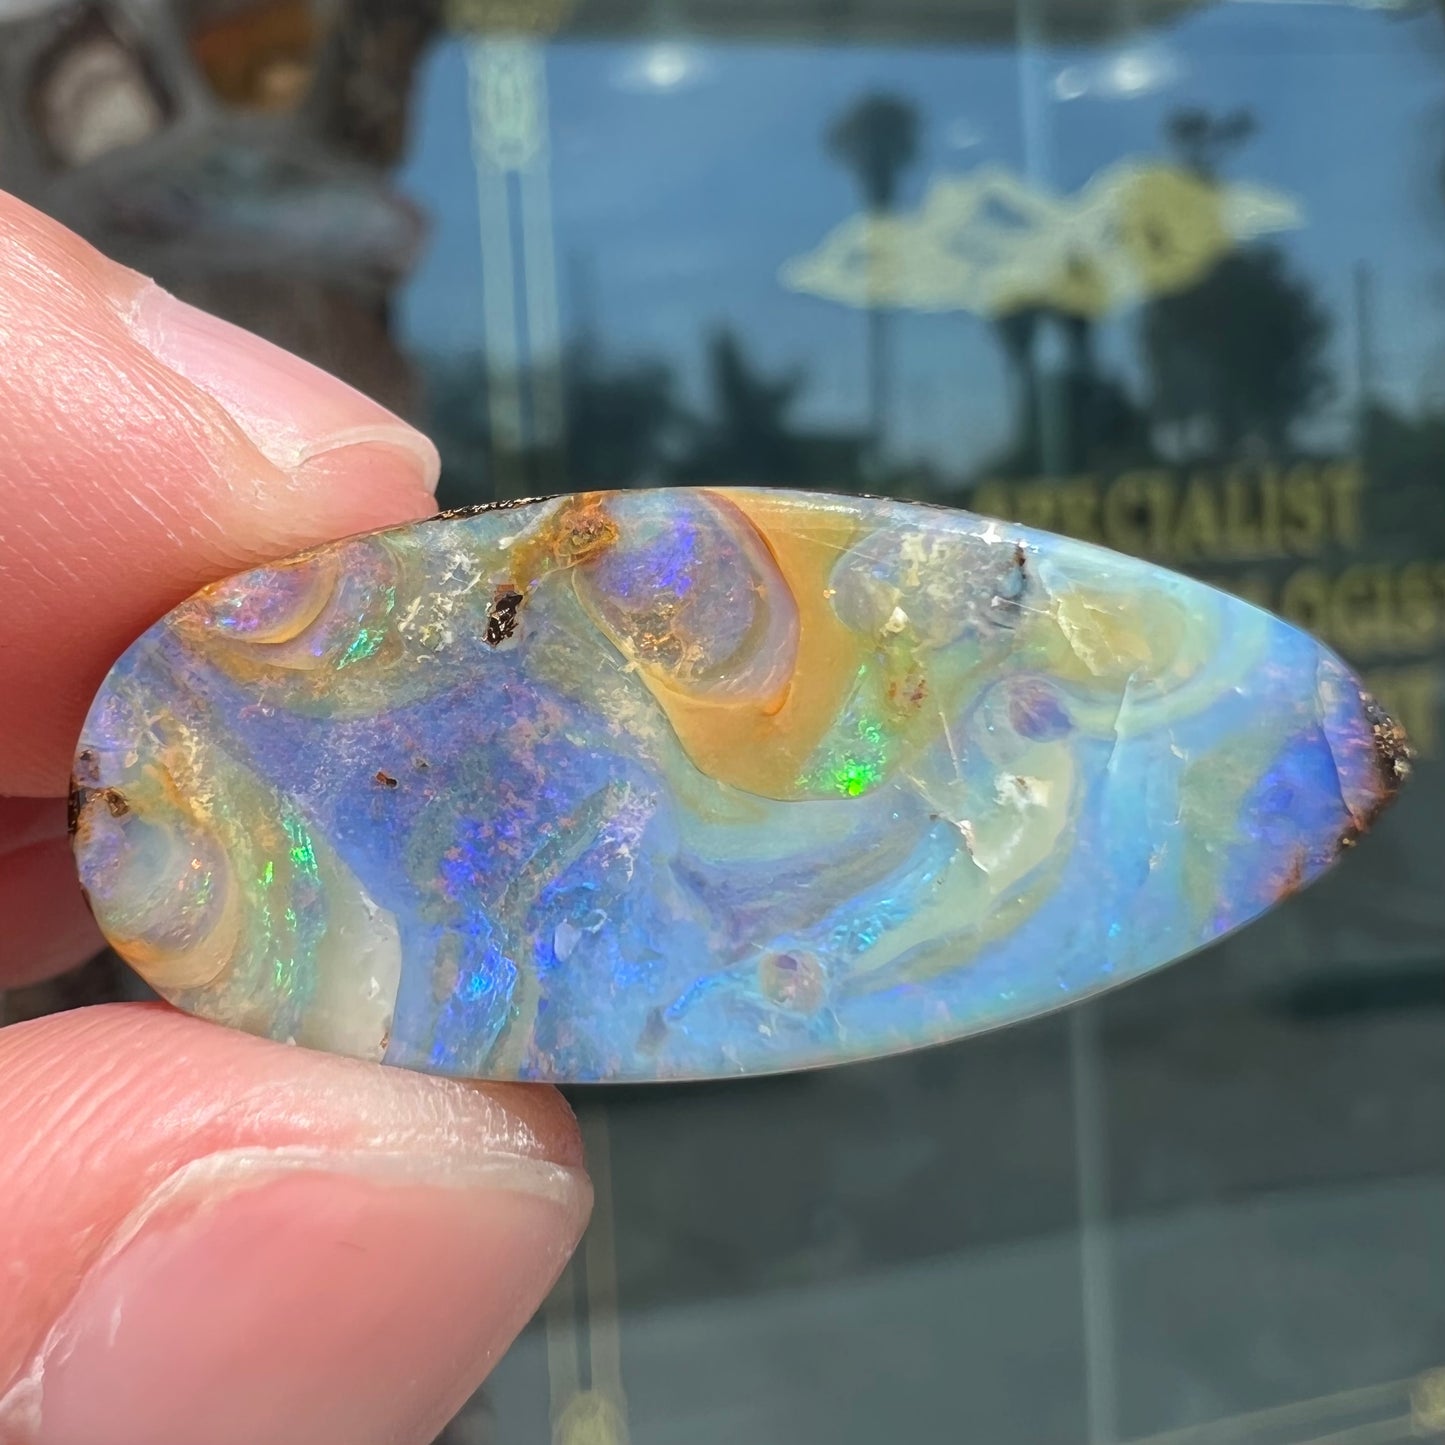 A loose, natural, pear shaped boulder opal stone from Quilpie, Australia.